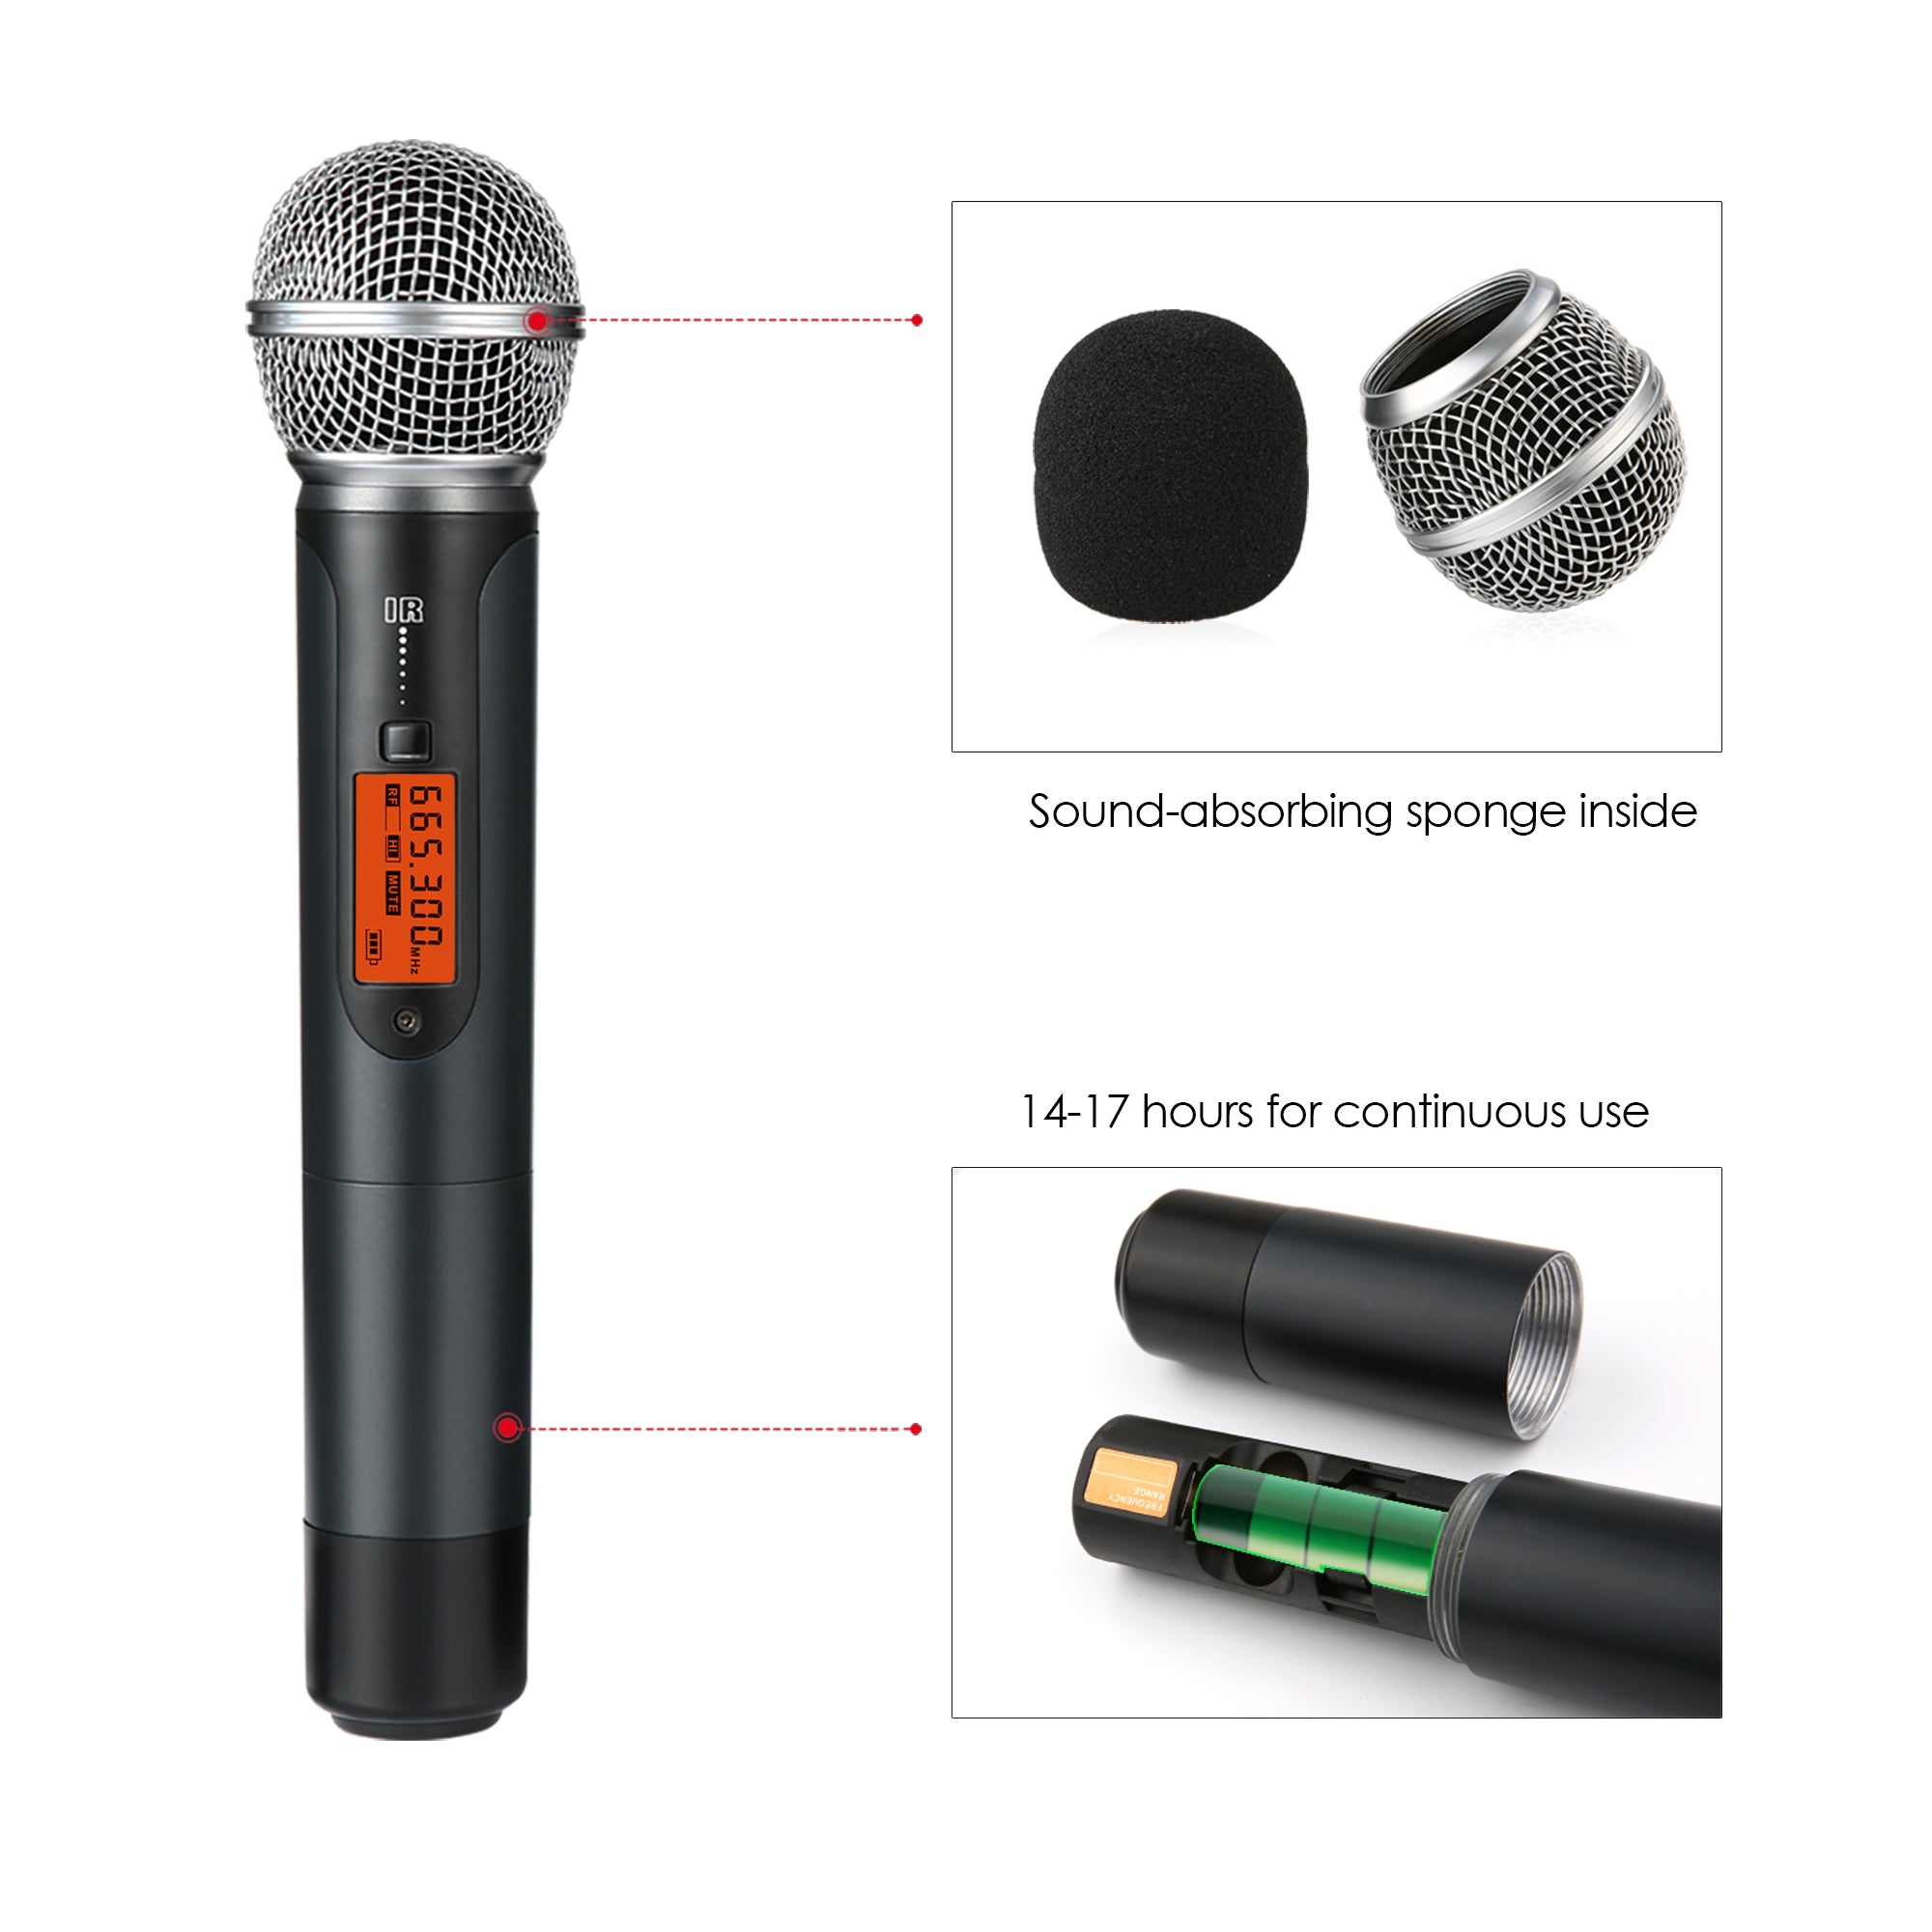 Achetez CD-08 Dual Professionnel UHF Microphone Microphone Charge